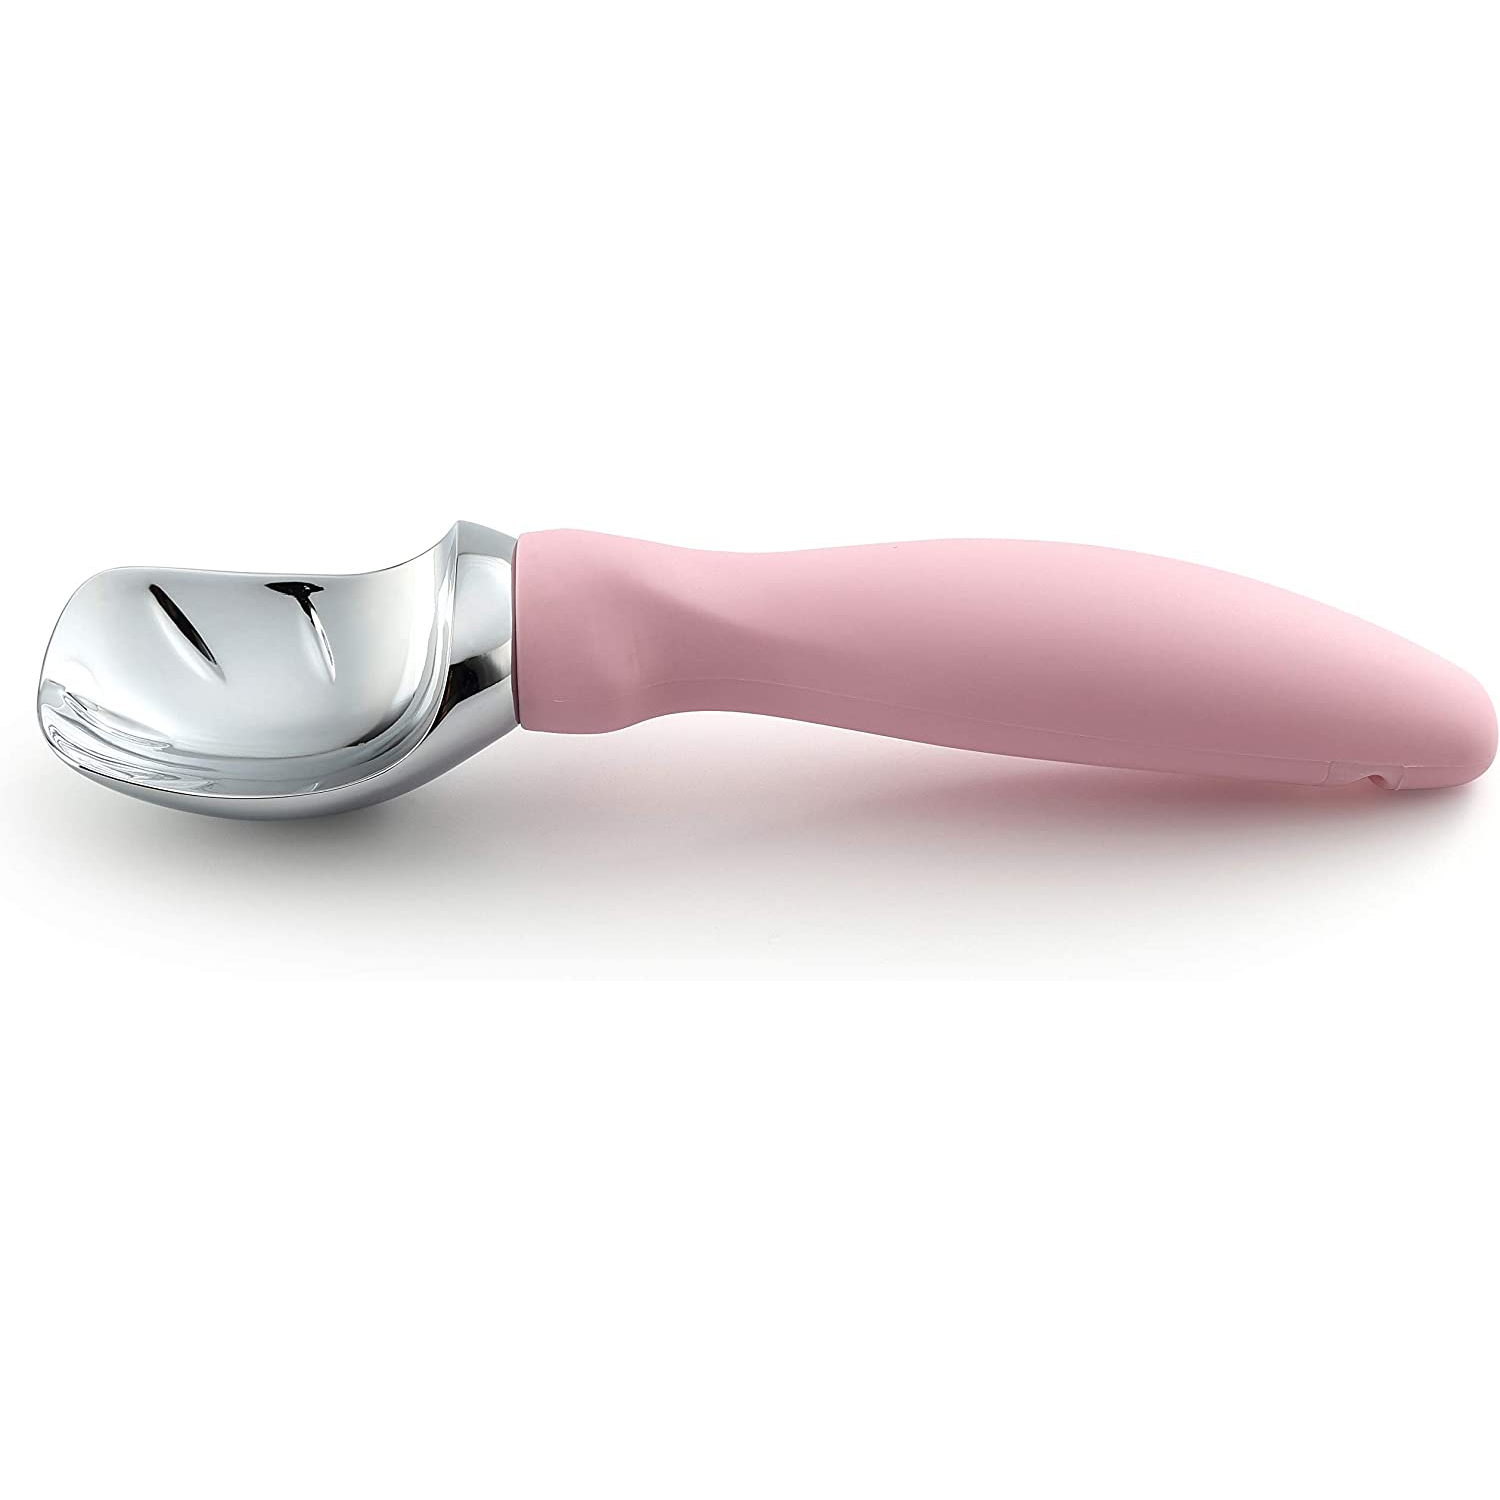 Spring Chef Ice Cream Scoop with Soft Grip Handle